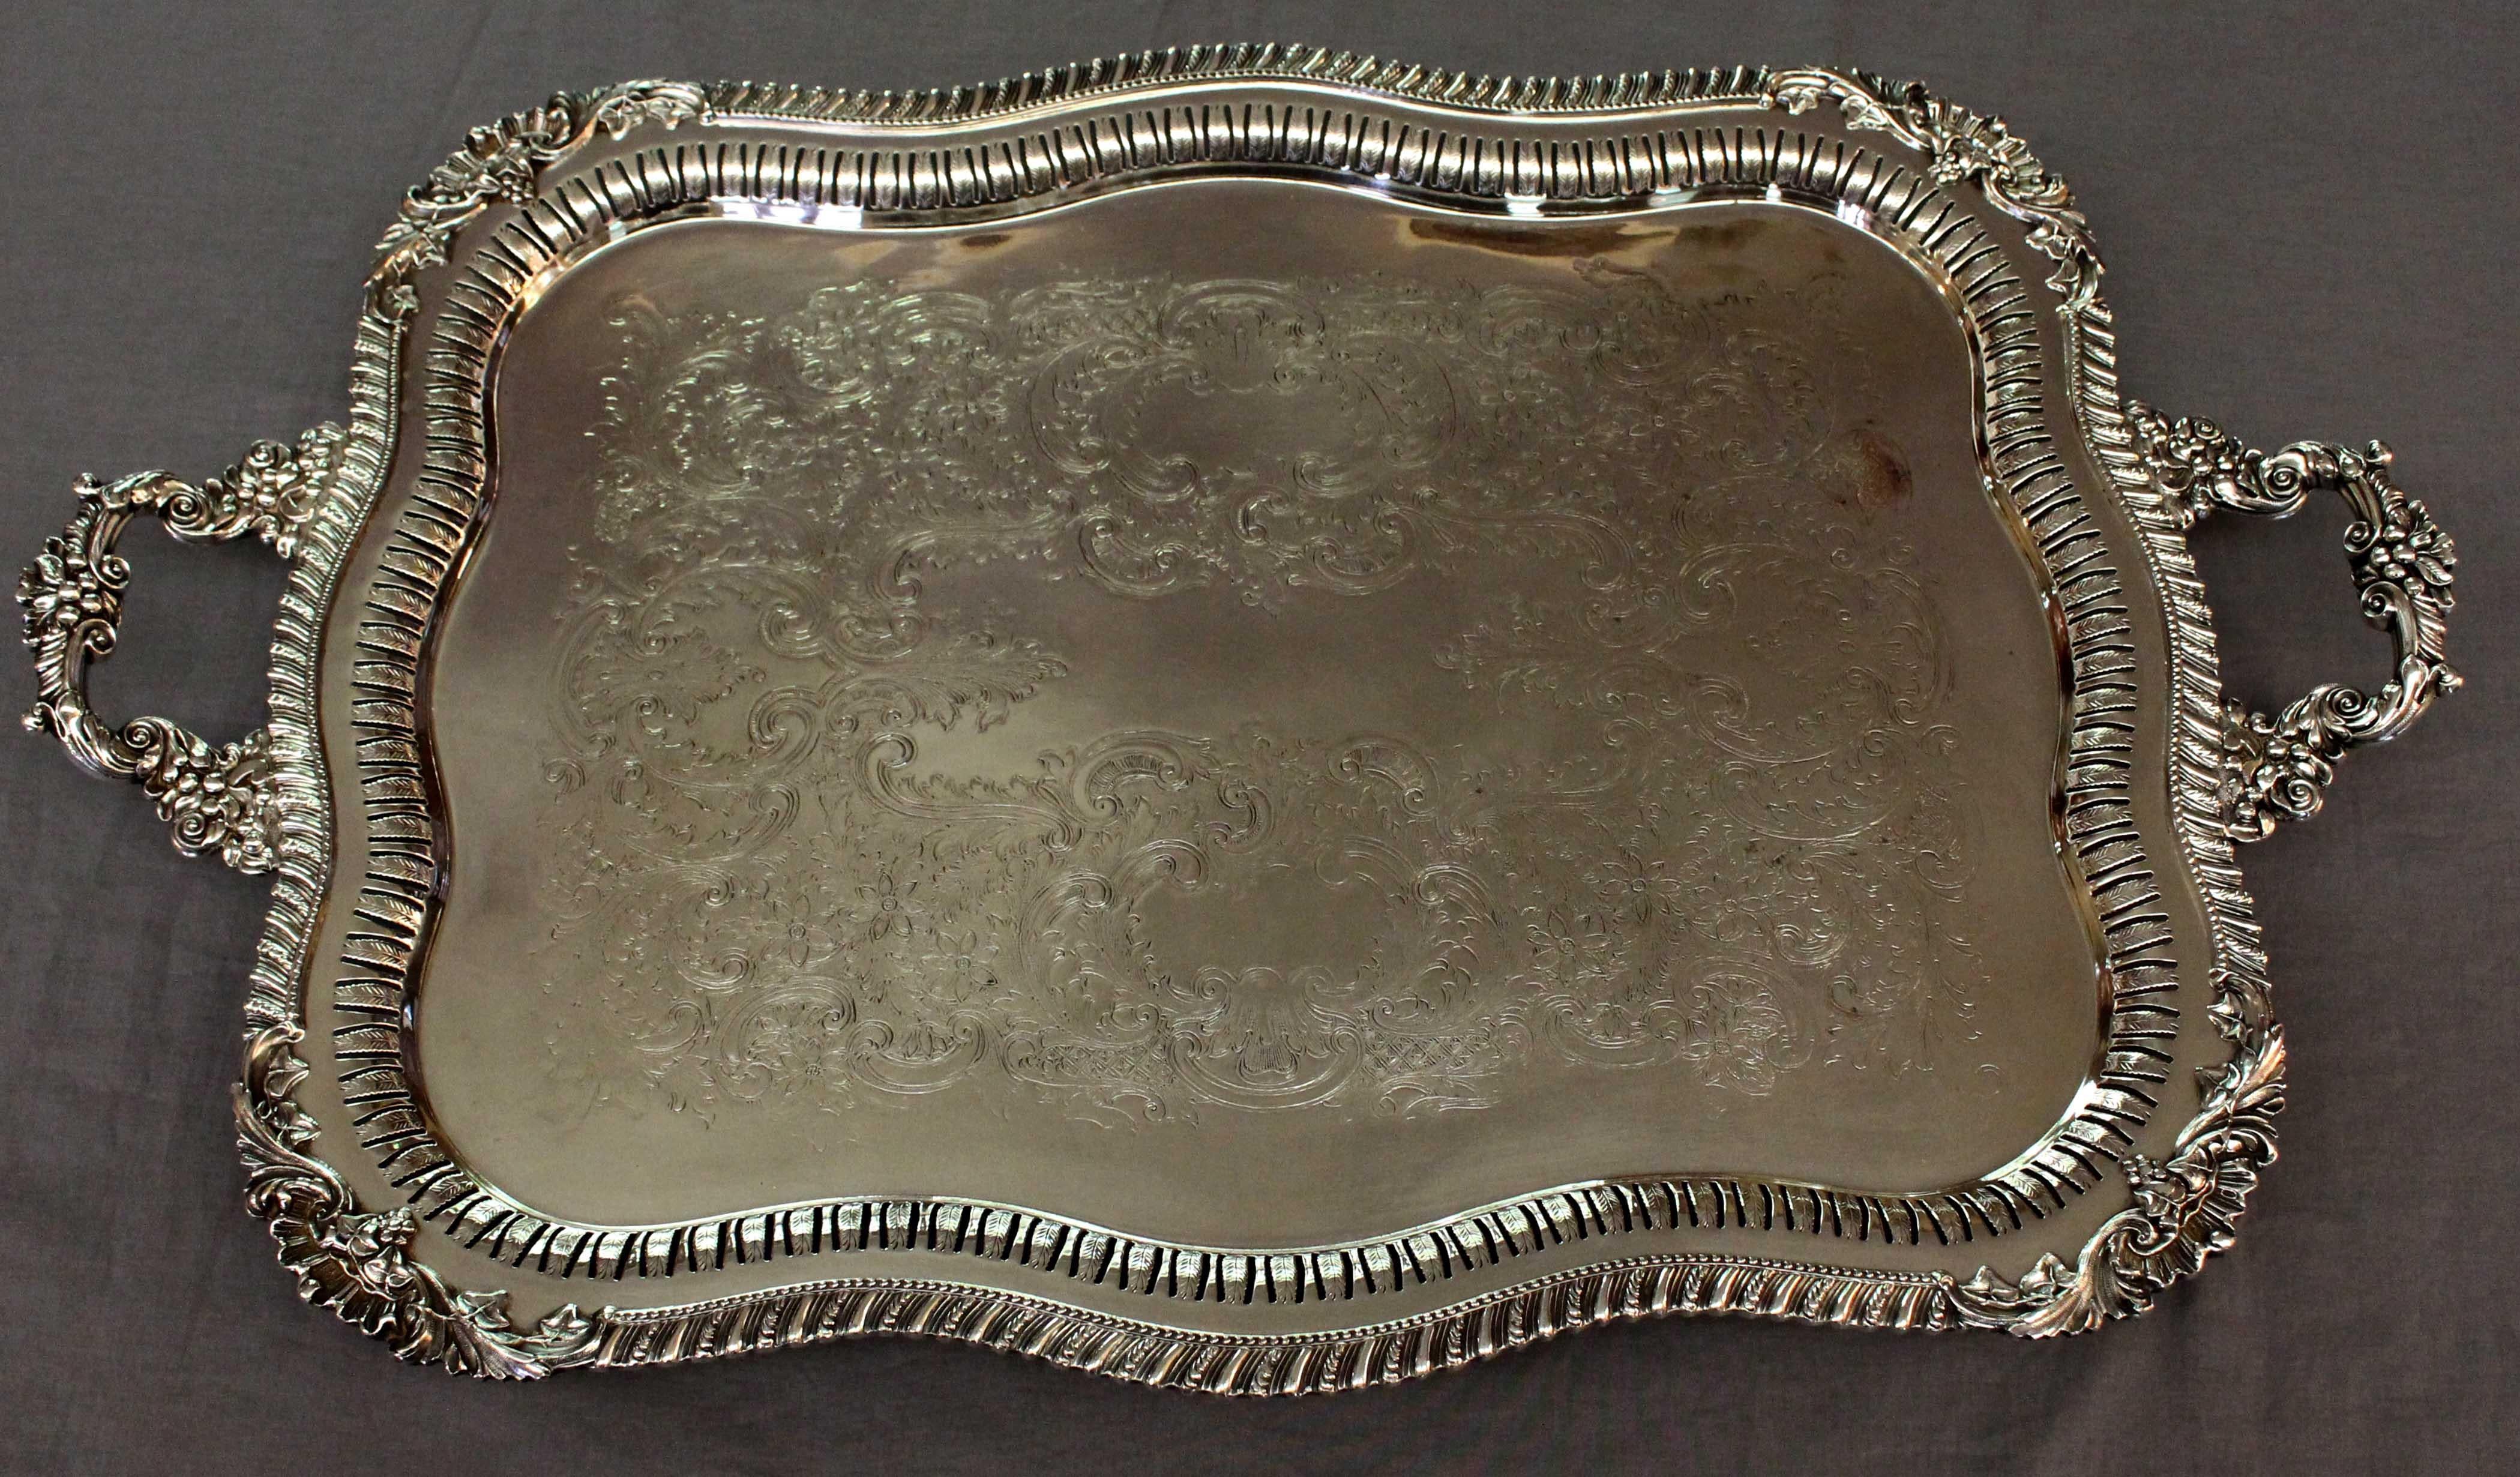 Circa 1940s silver on copper tea tray by the Crown Silver Co, Brookline, MA. Made after 1933. Cast borders & an inner reticulated border create a classic design. The borders & handles with shells & grapes. Shell & scroll feet . Some light bleeding &